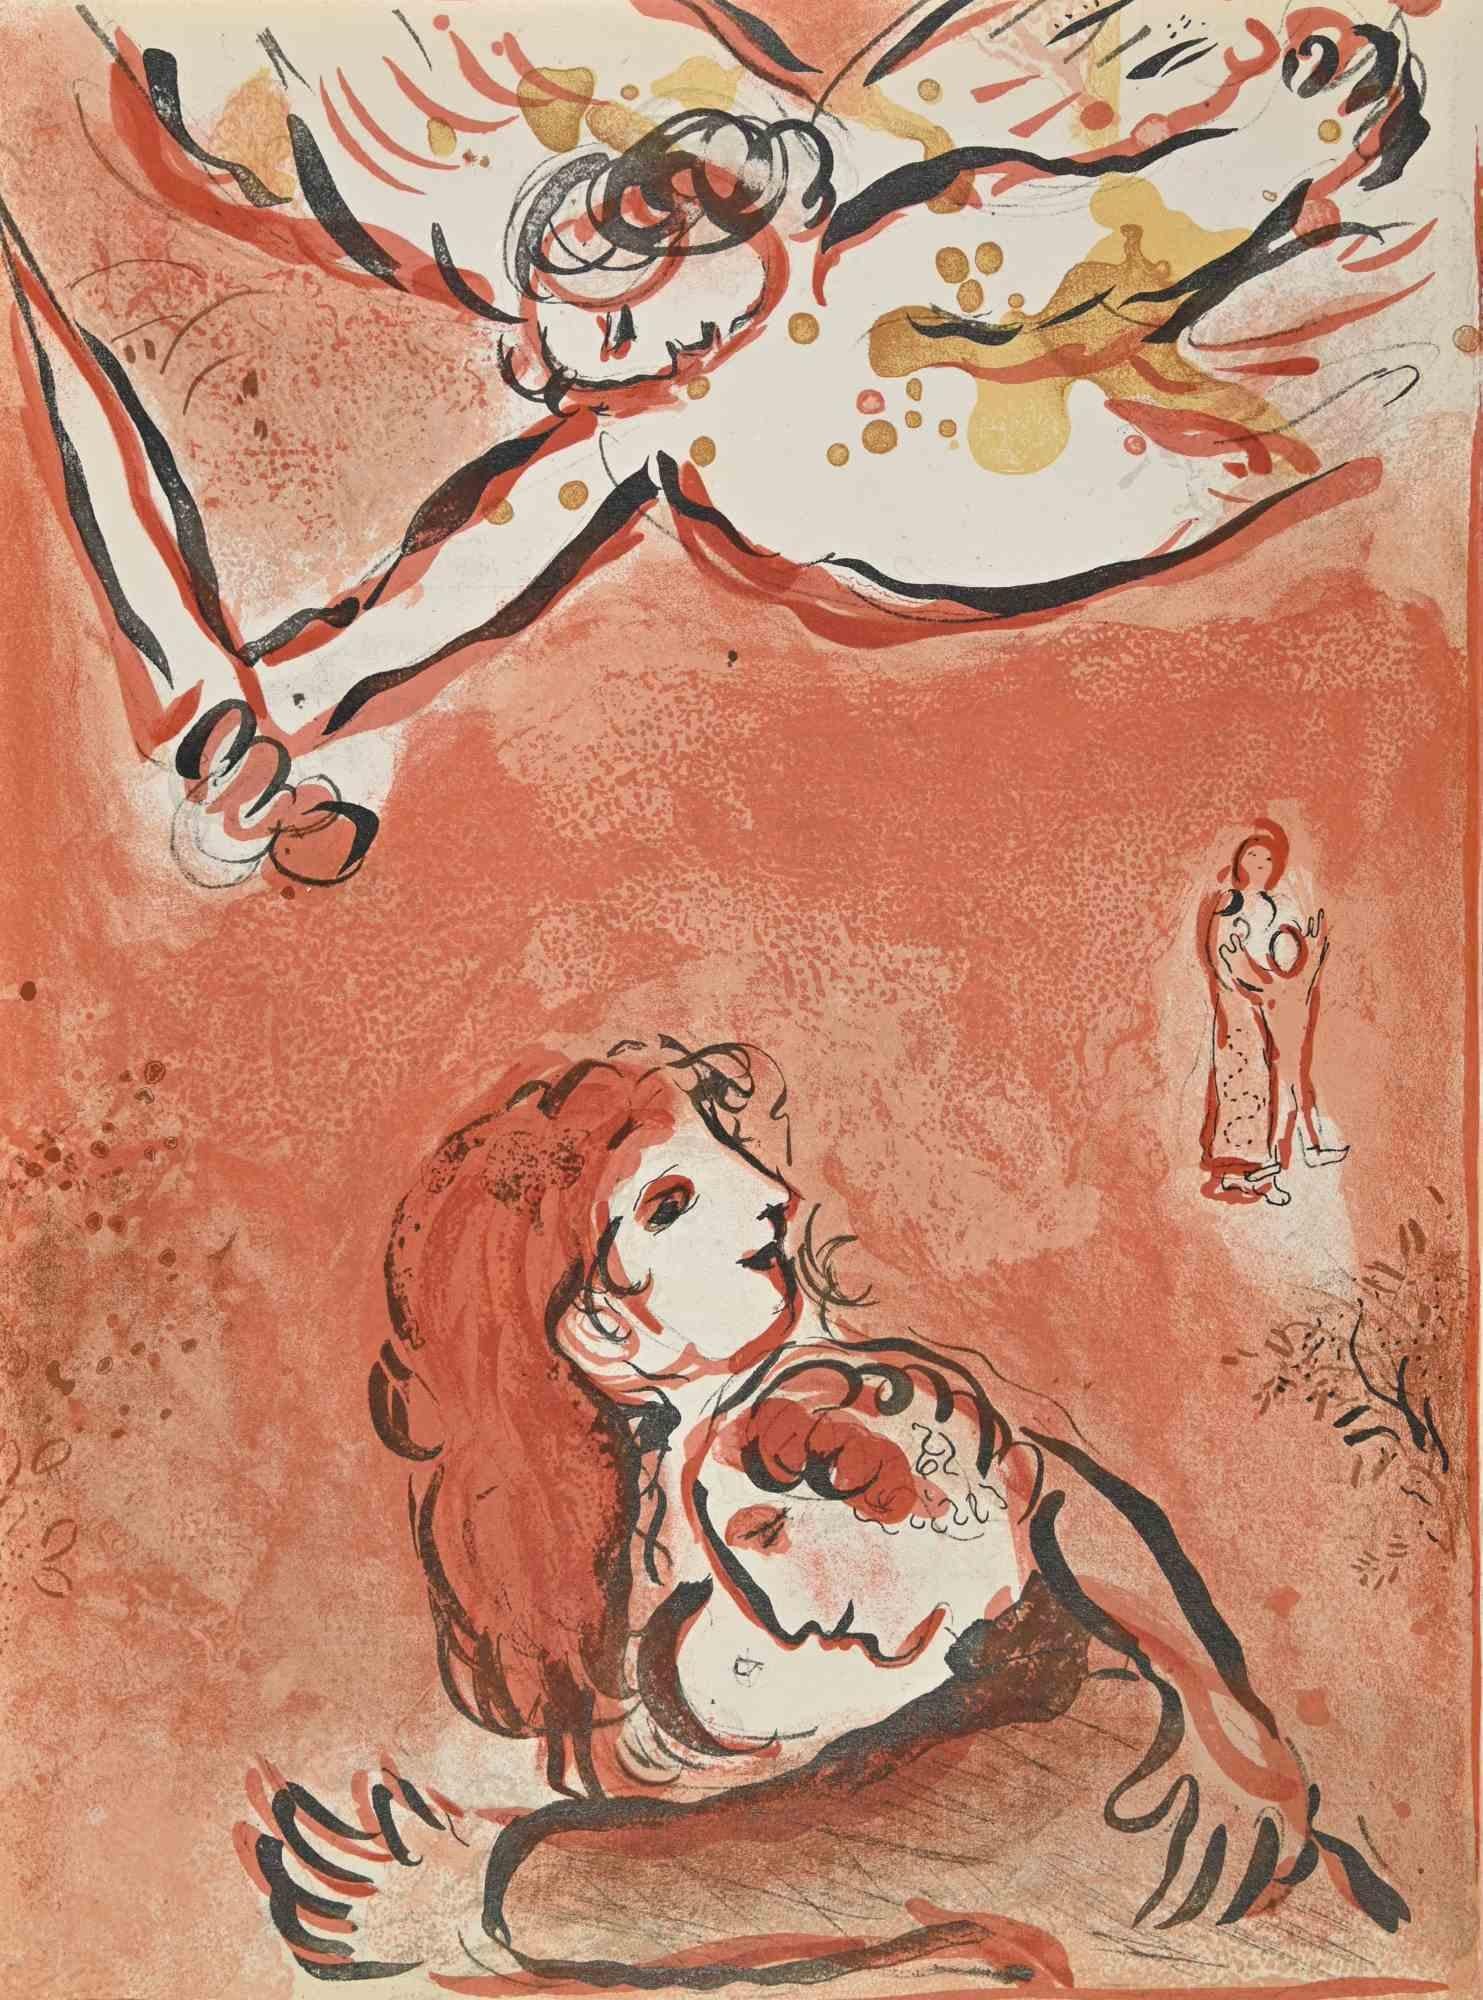 The face of Israel  is a an artwork from the Series "The Bible", by Marc Chagall in 1960.

Mixed colored lithograph on brown-toned paper, no signature.

Edition of 6500 unsigned lithographs. Printed by Mourlot and published by Tériade, Paris.

Ref.